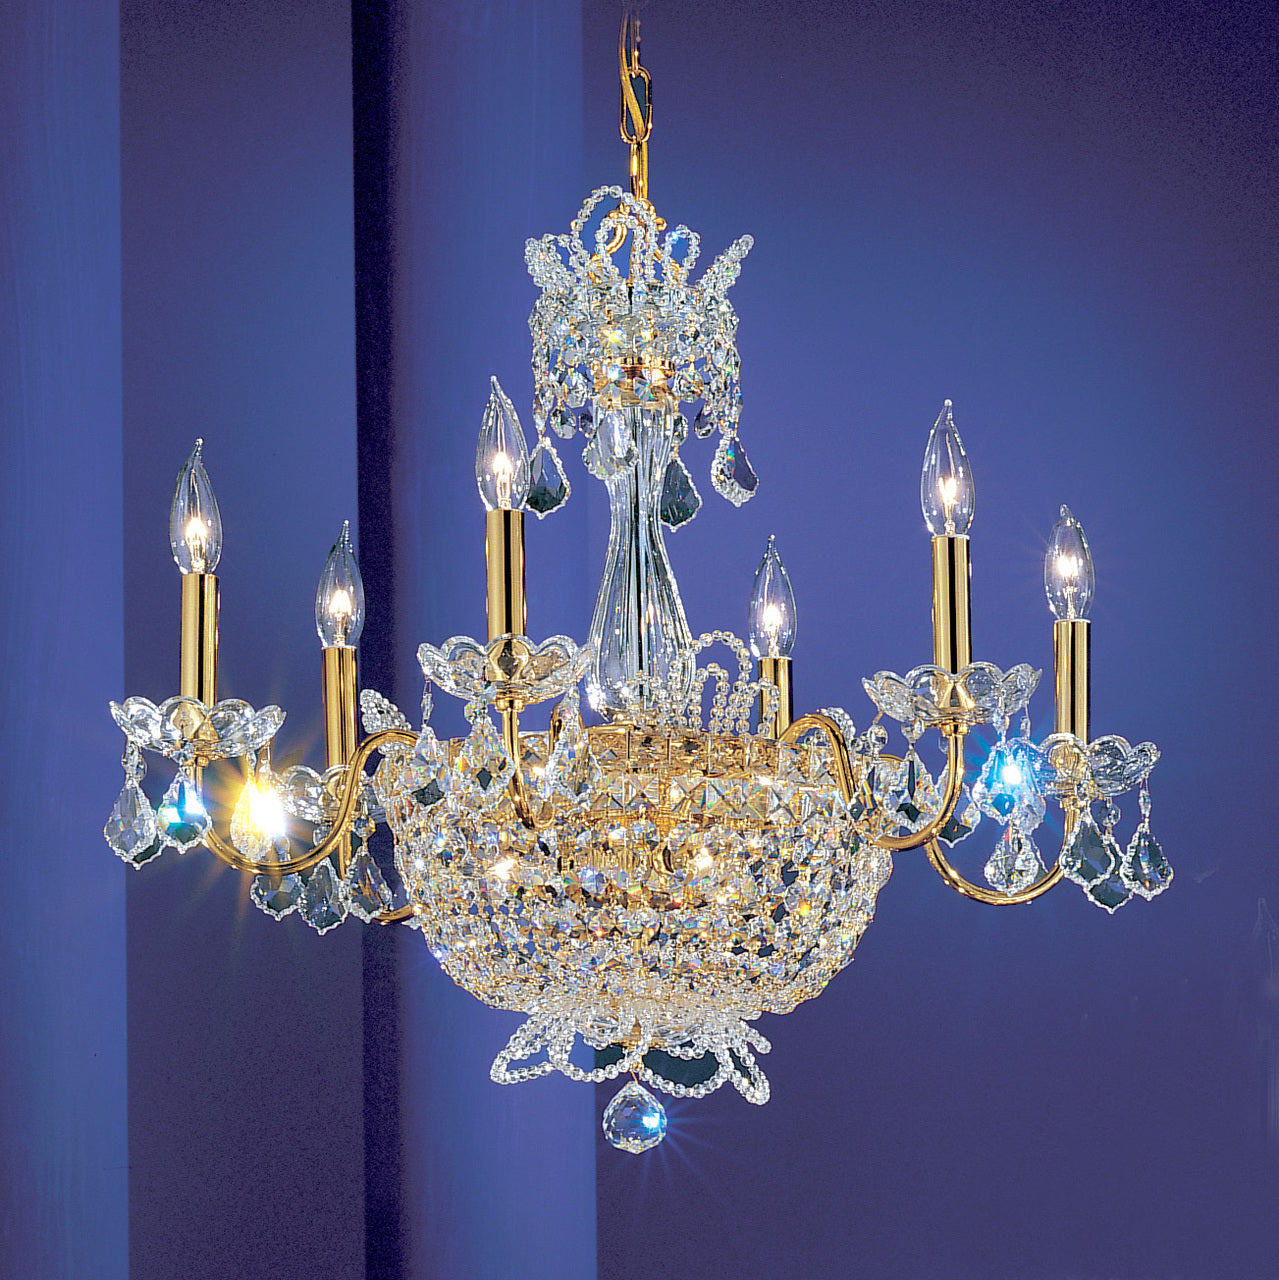 Classic Lighting 69786 GP S Crown Jewels Crystal Chandelier in Gold